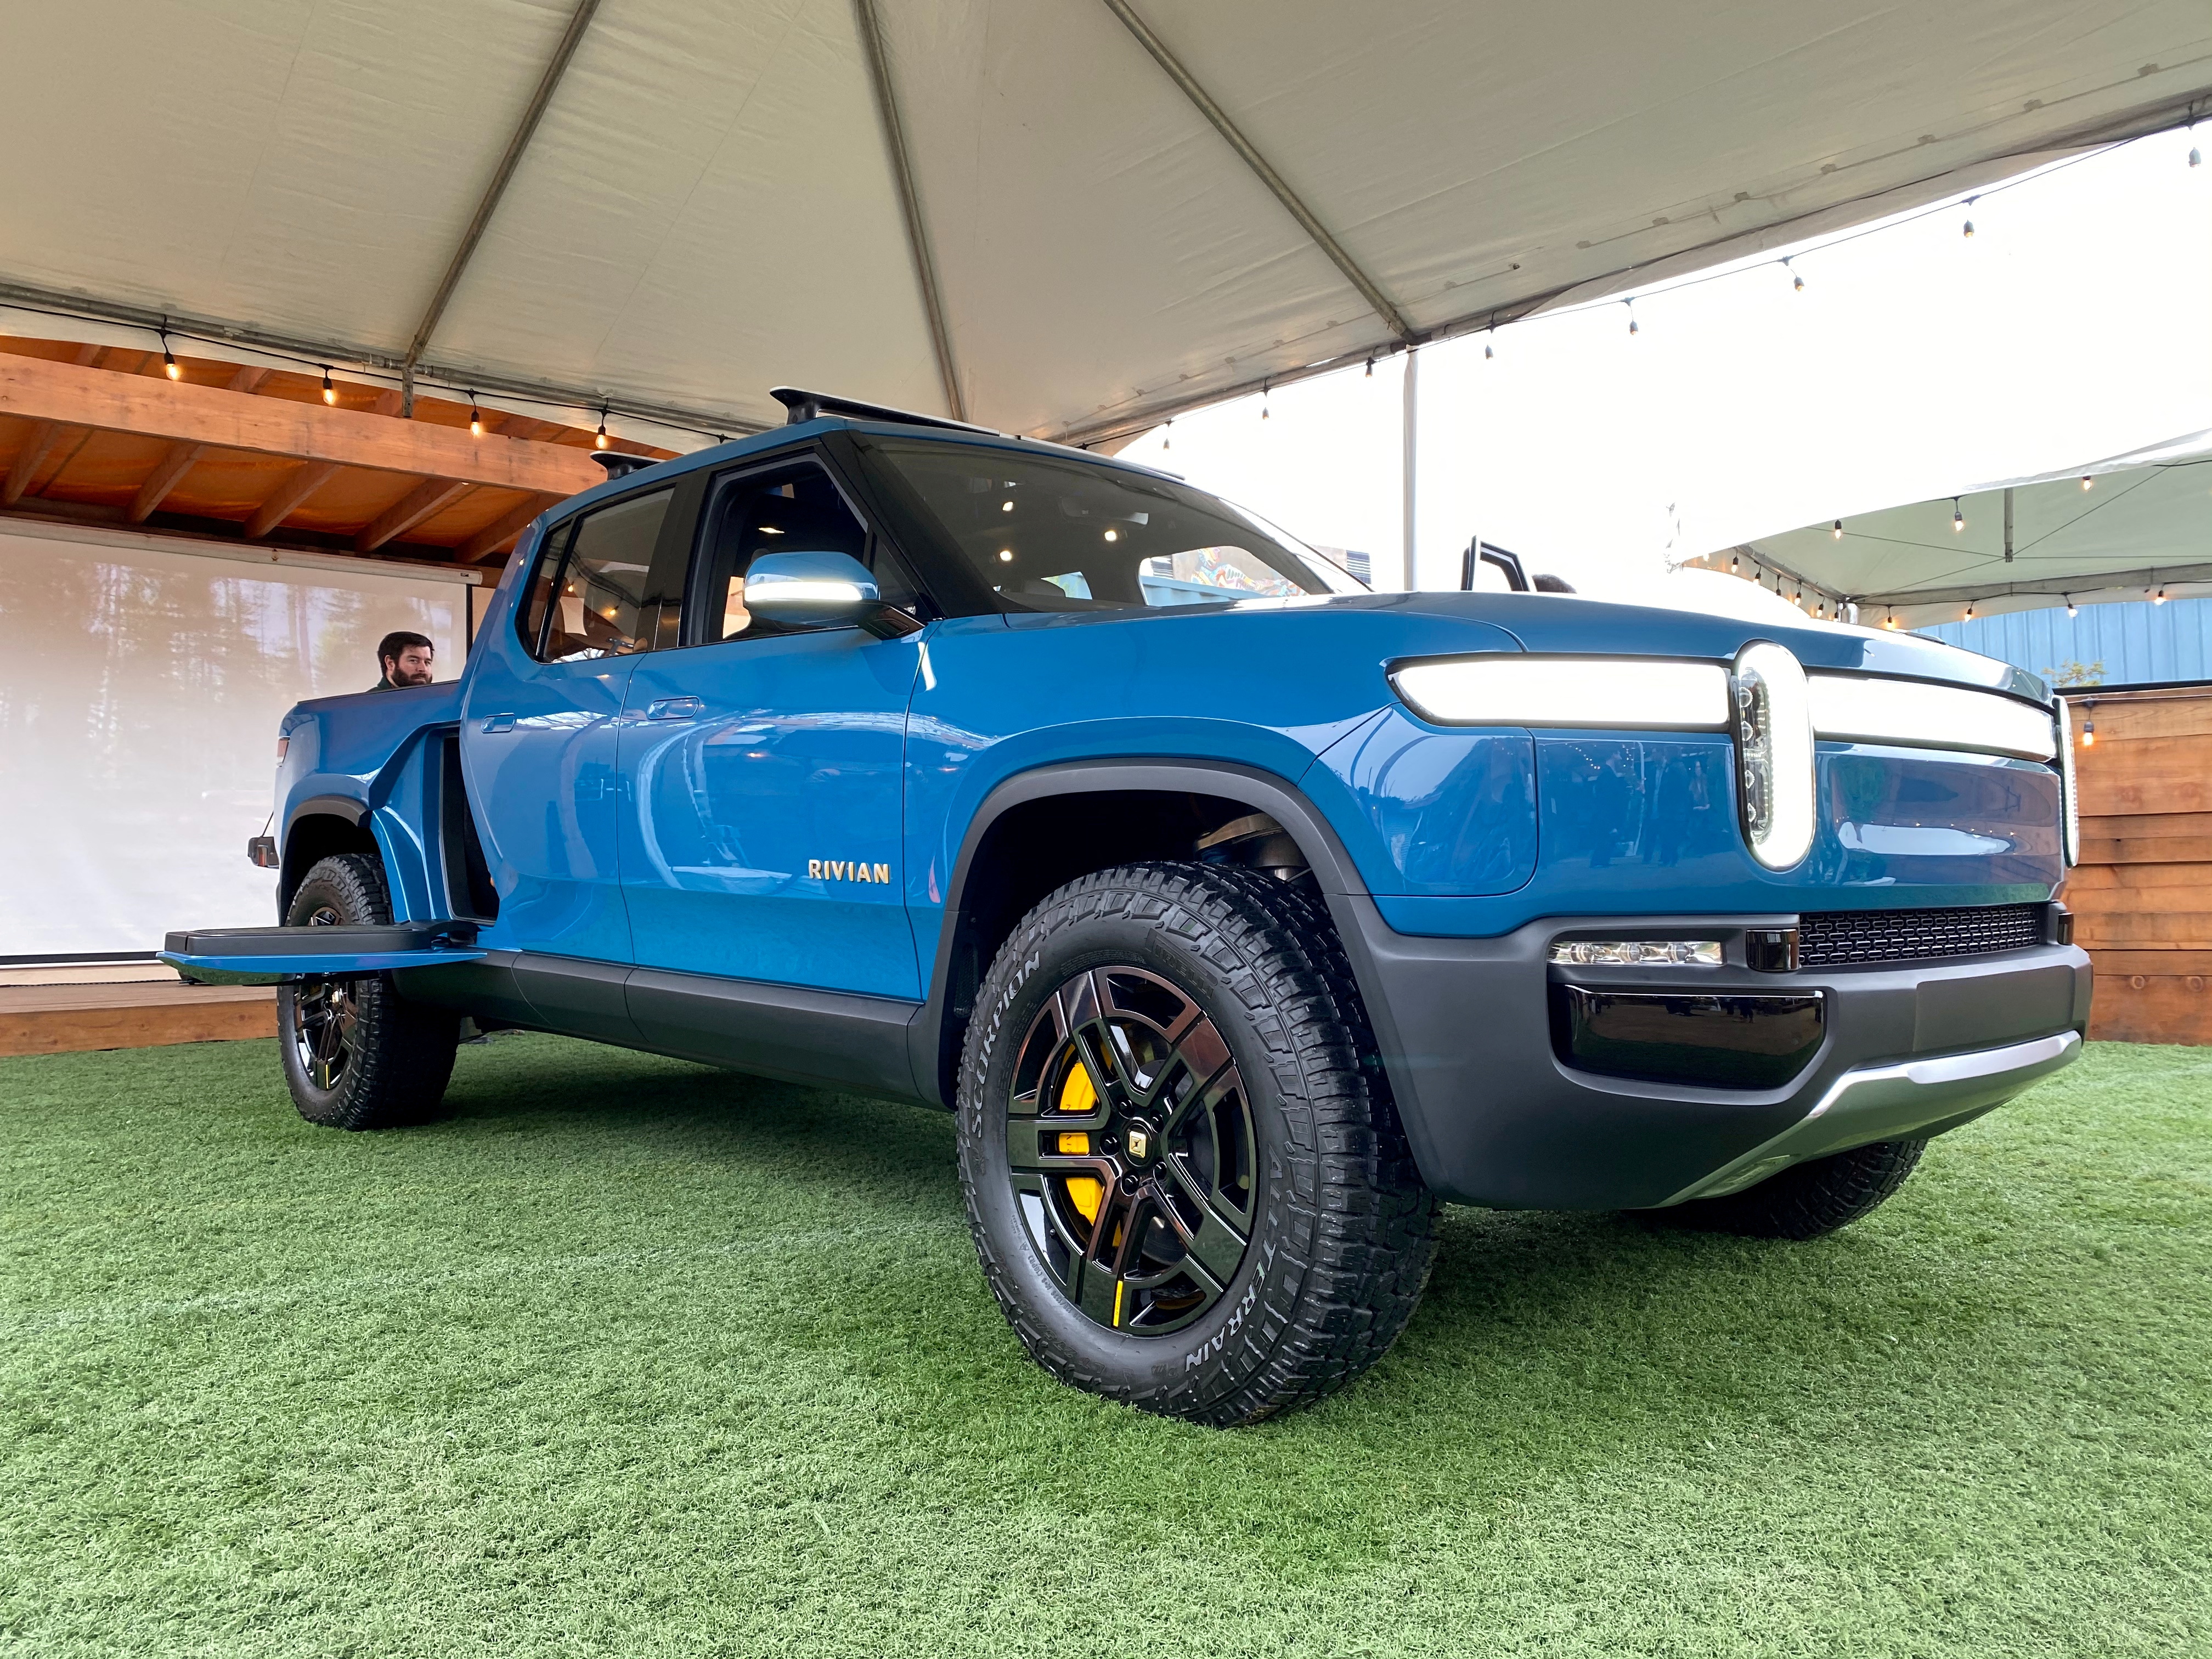 Electric vehicle startup Rivian shows off its SUV truck in Mill Valley